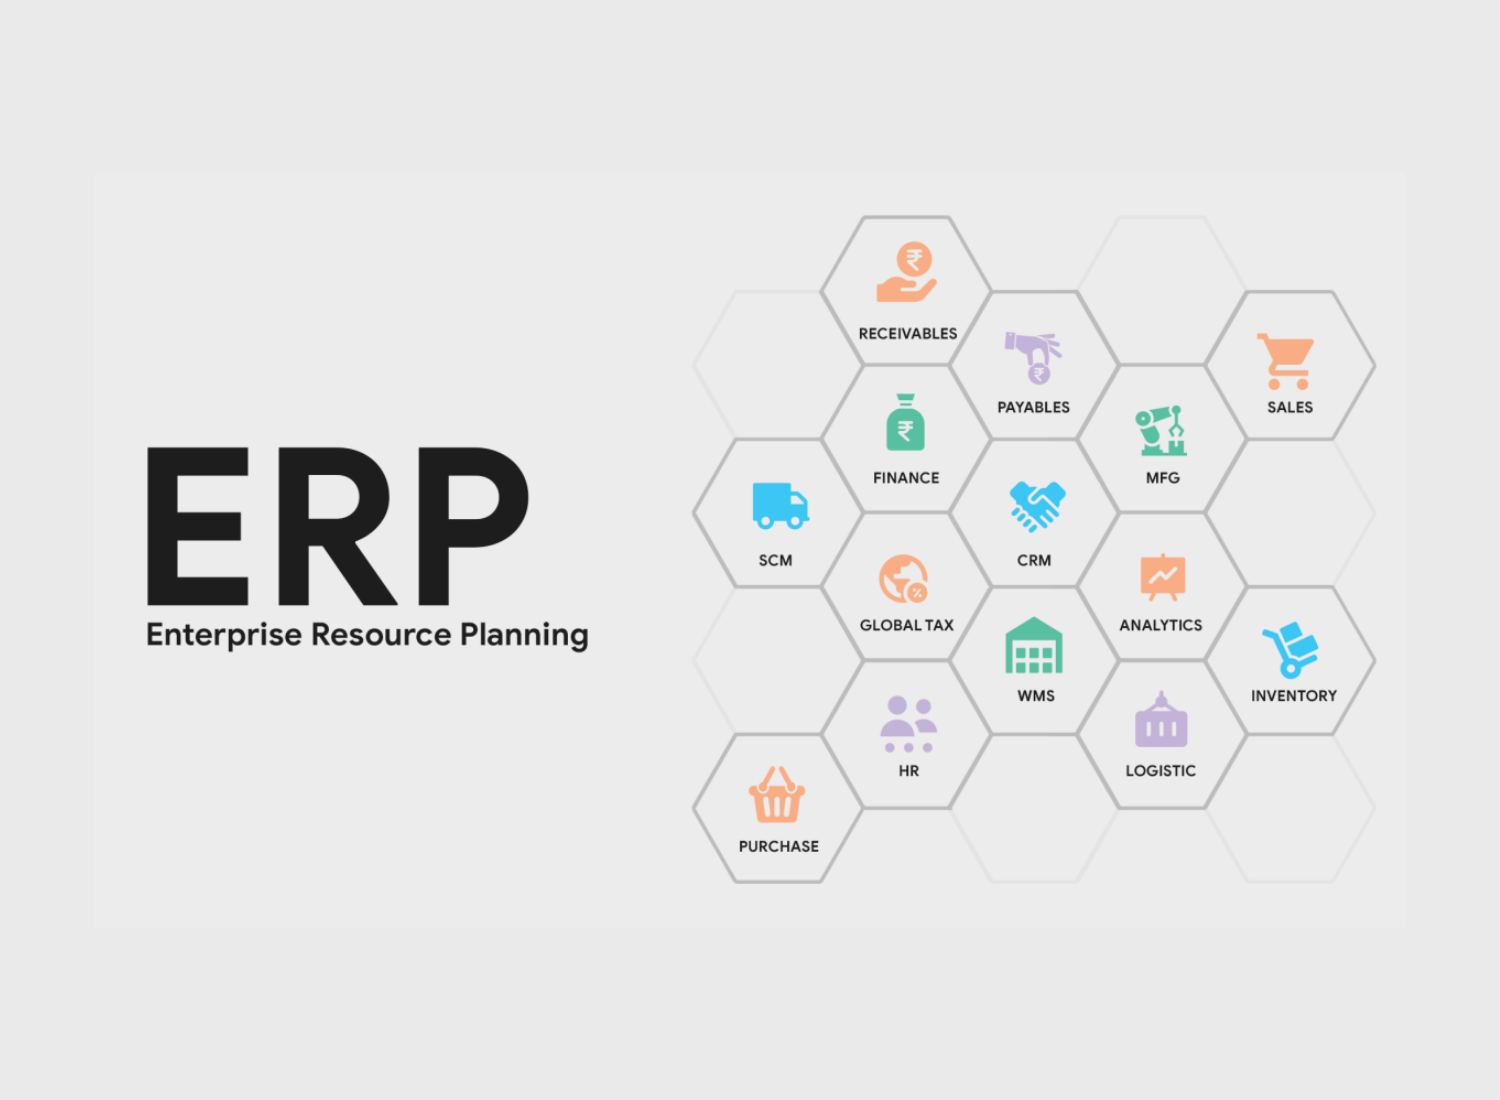 How To Measure The Success Of ERP Implementation In 6 Ways - RexoERP Blog